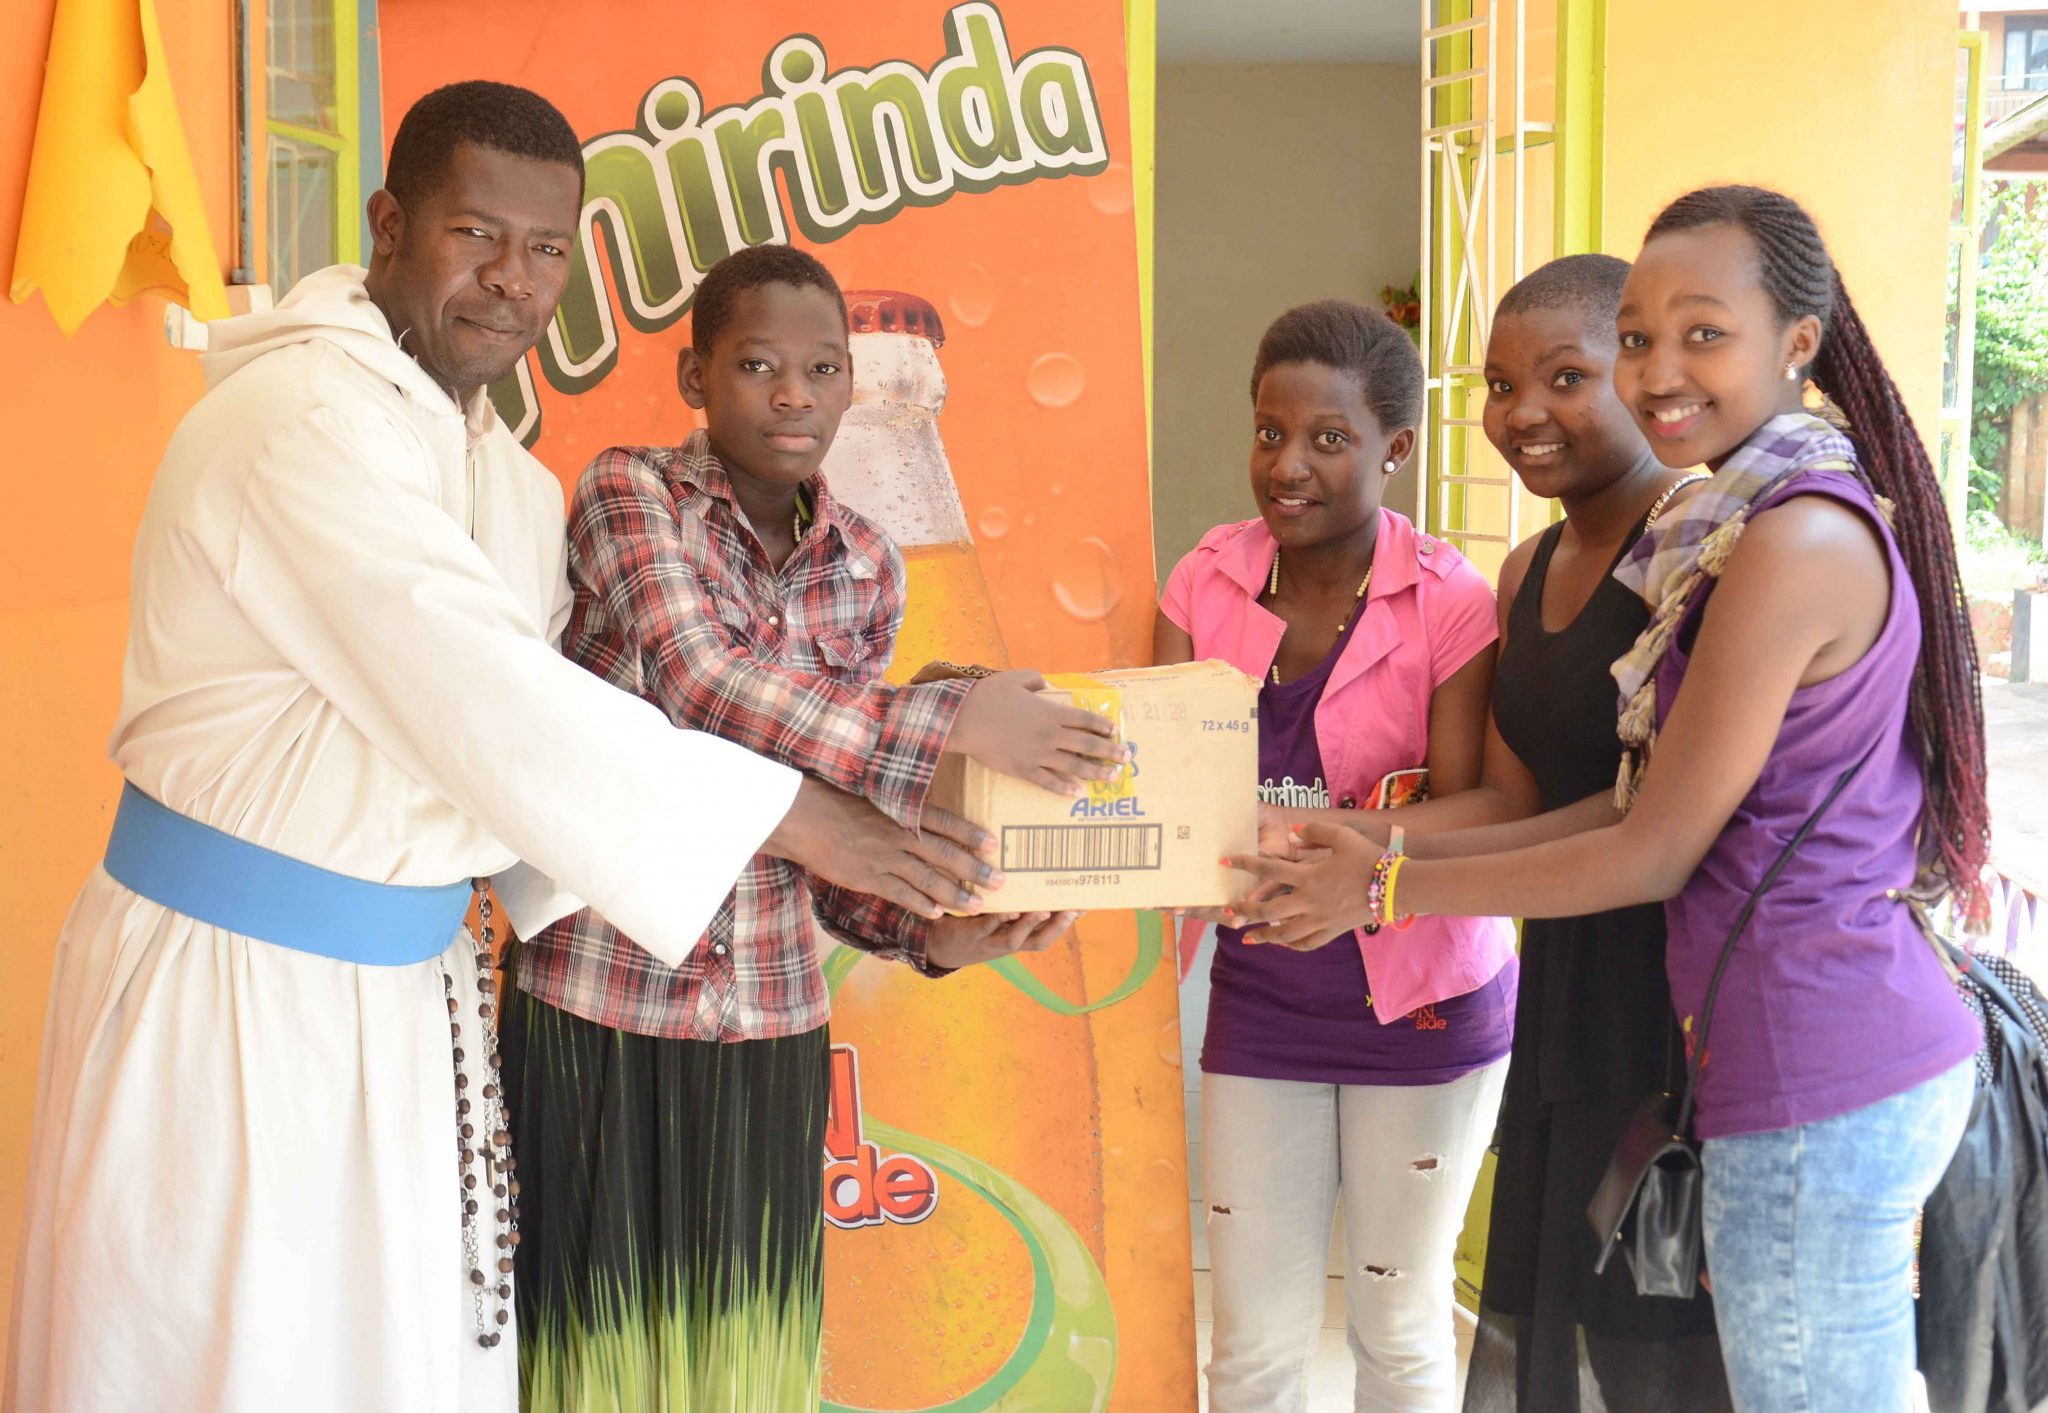 Reigning Mirinda Miss Teen- Vaneesa Nansoove (in pink) hands over toiletries and food supplies to the Missionaries of the Poor represented by brother Loubert